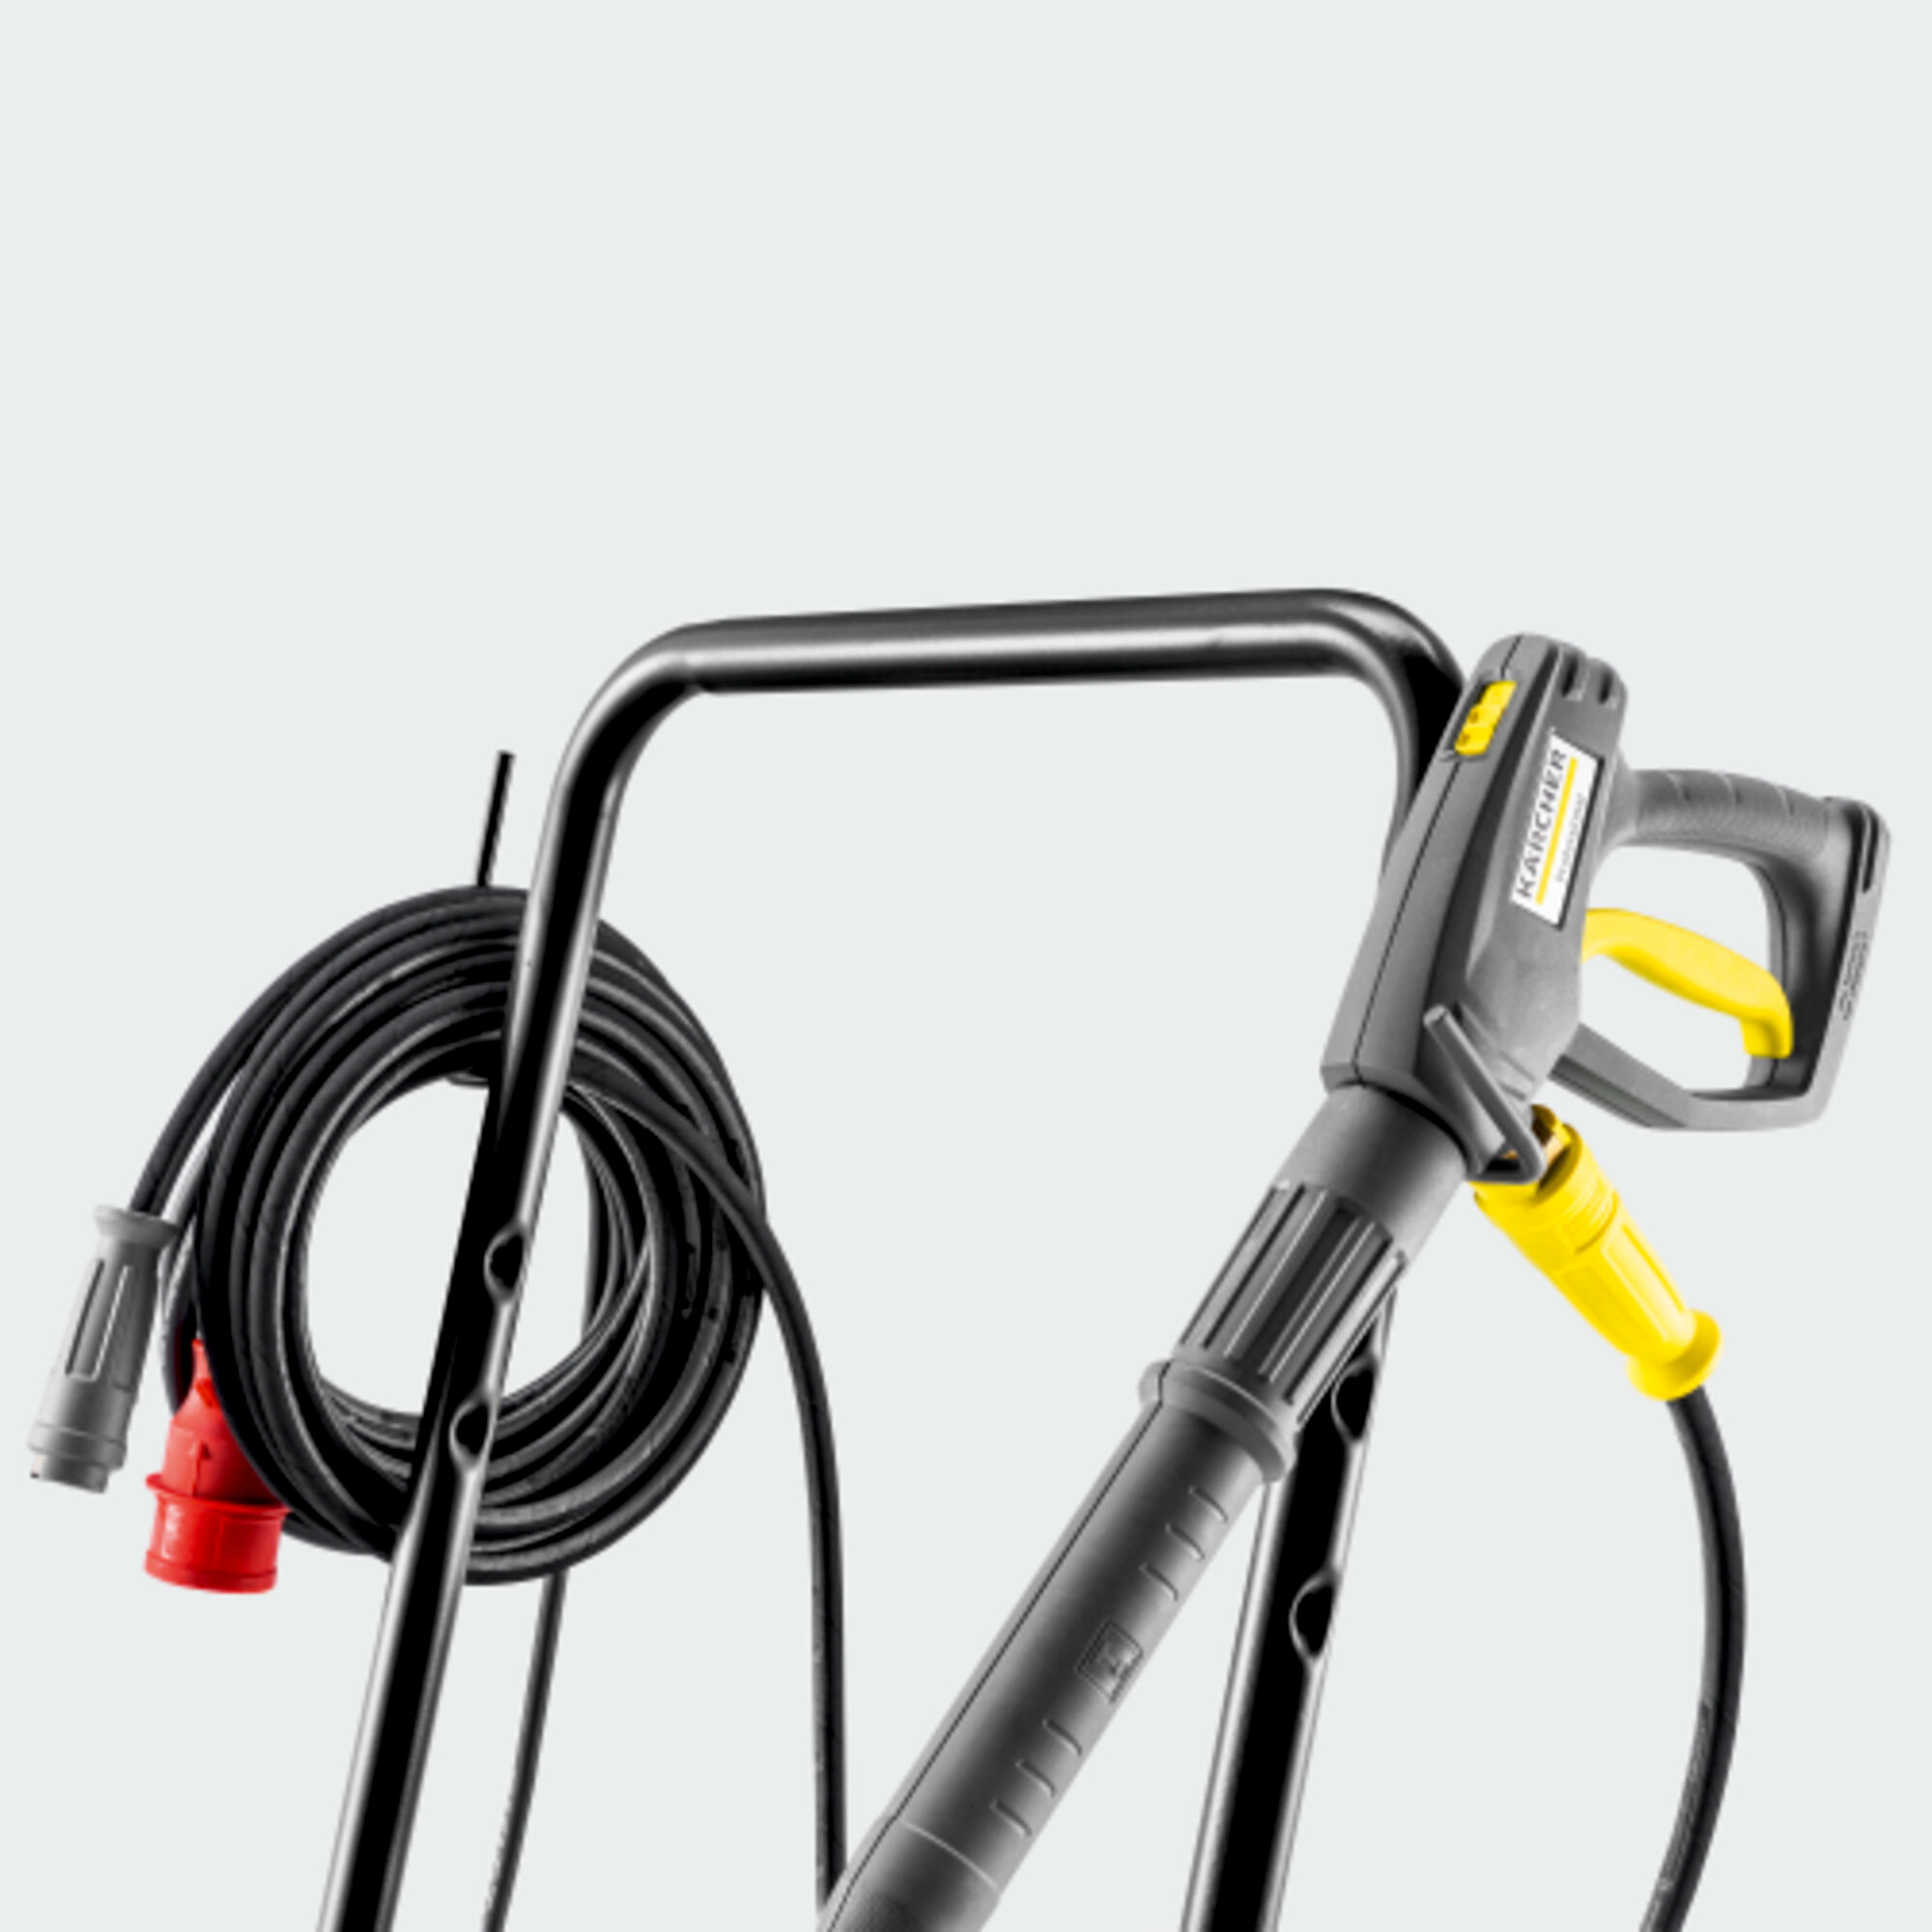 High pressure cleaner HD 10/21-4 S Classic: Classic accessories with EASY!Lock connections